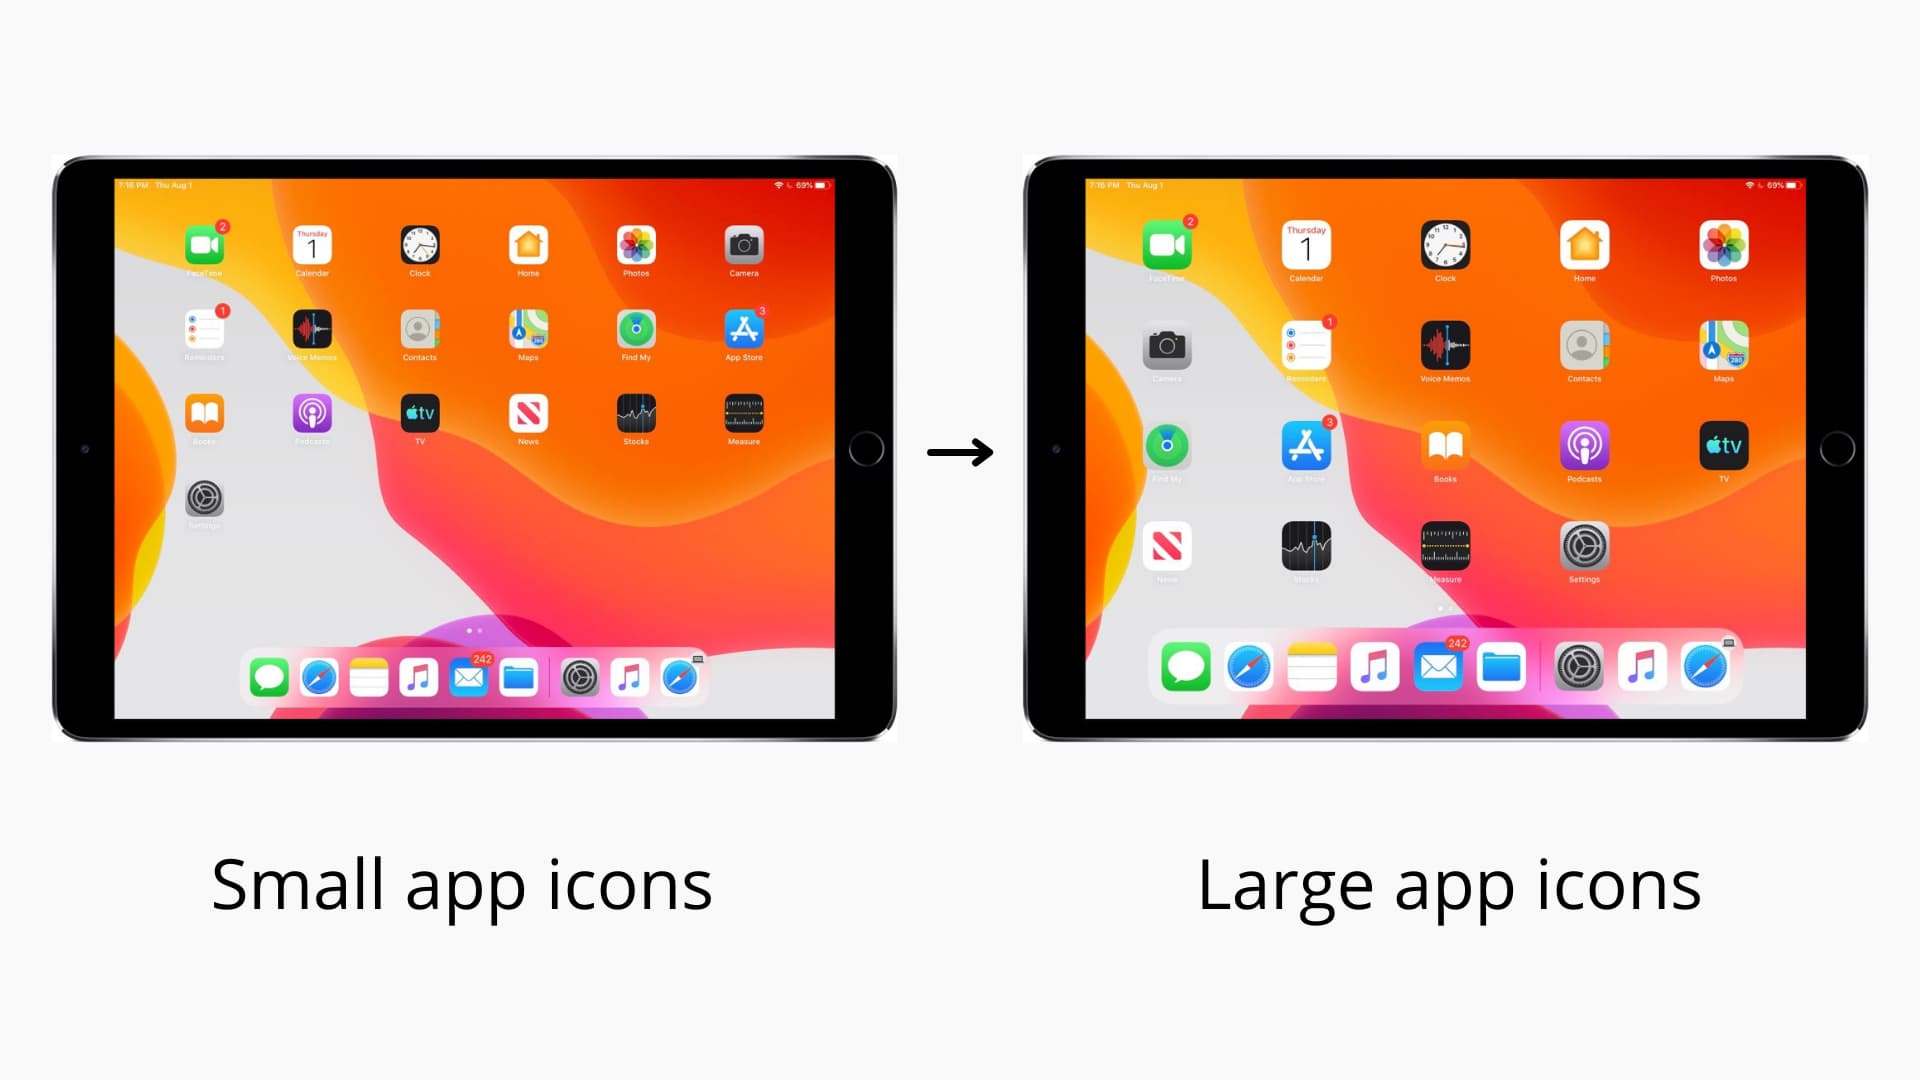 Small and large iPad app icons shown next to each other